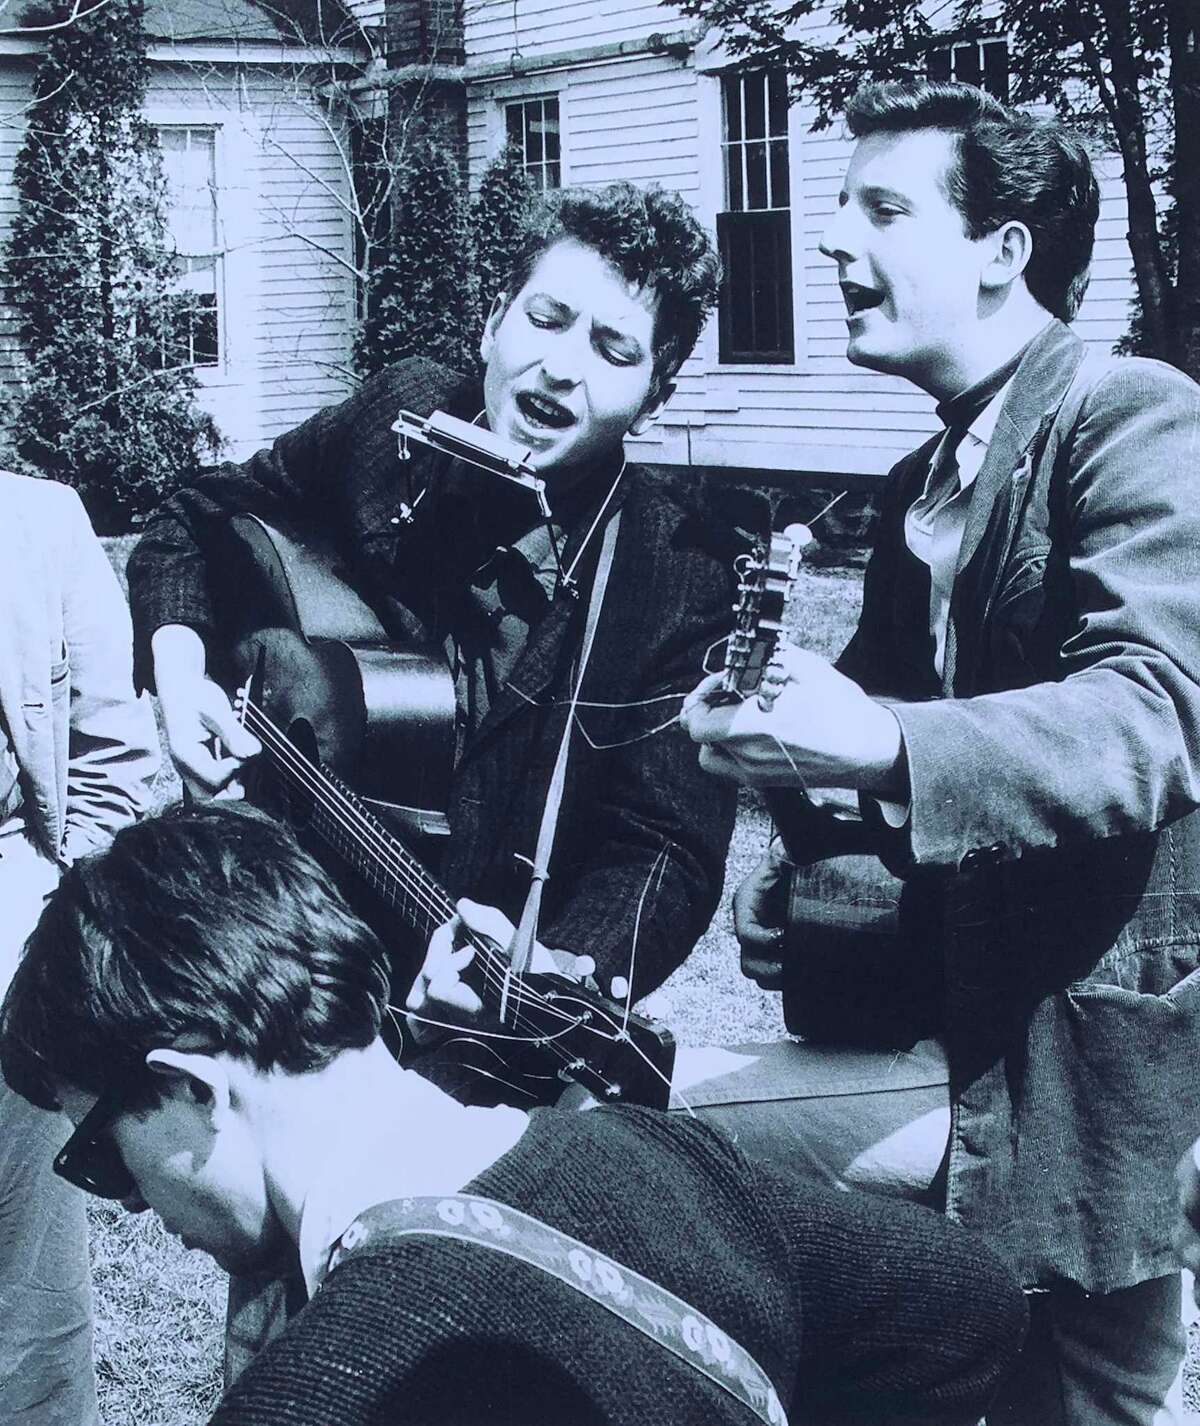 Bob Dylan, then 19, center, jams with Mark Spoelstra, right, and Bob Neuwirth, lower left, at the 1961 Indian Neck Folk Festival on May 6, 1961. The photo was taken by Stephen H. Fenerjian, a then-27-year-old Cambridge, Mass., photographer. Fernerjian now is 87 and living in Sharon, Mass.